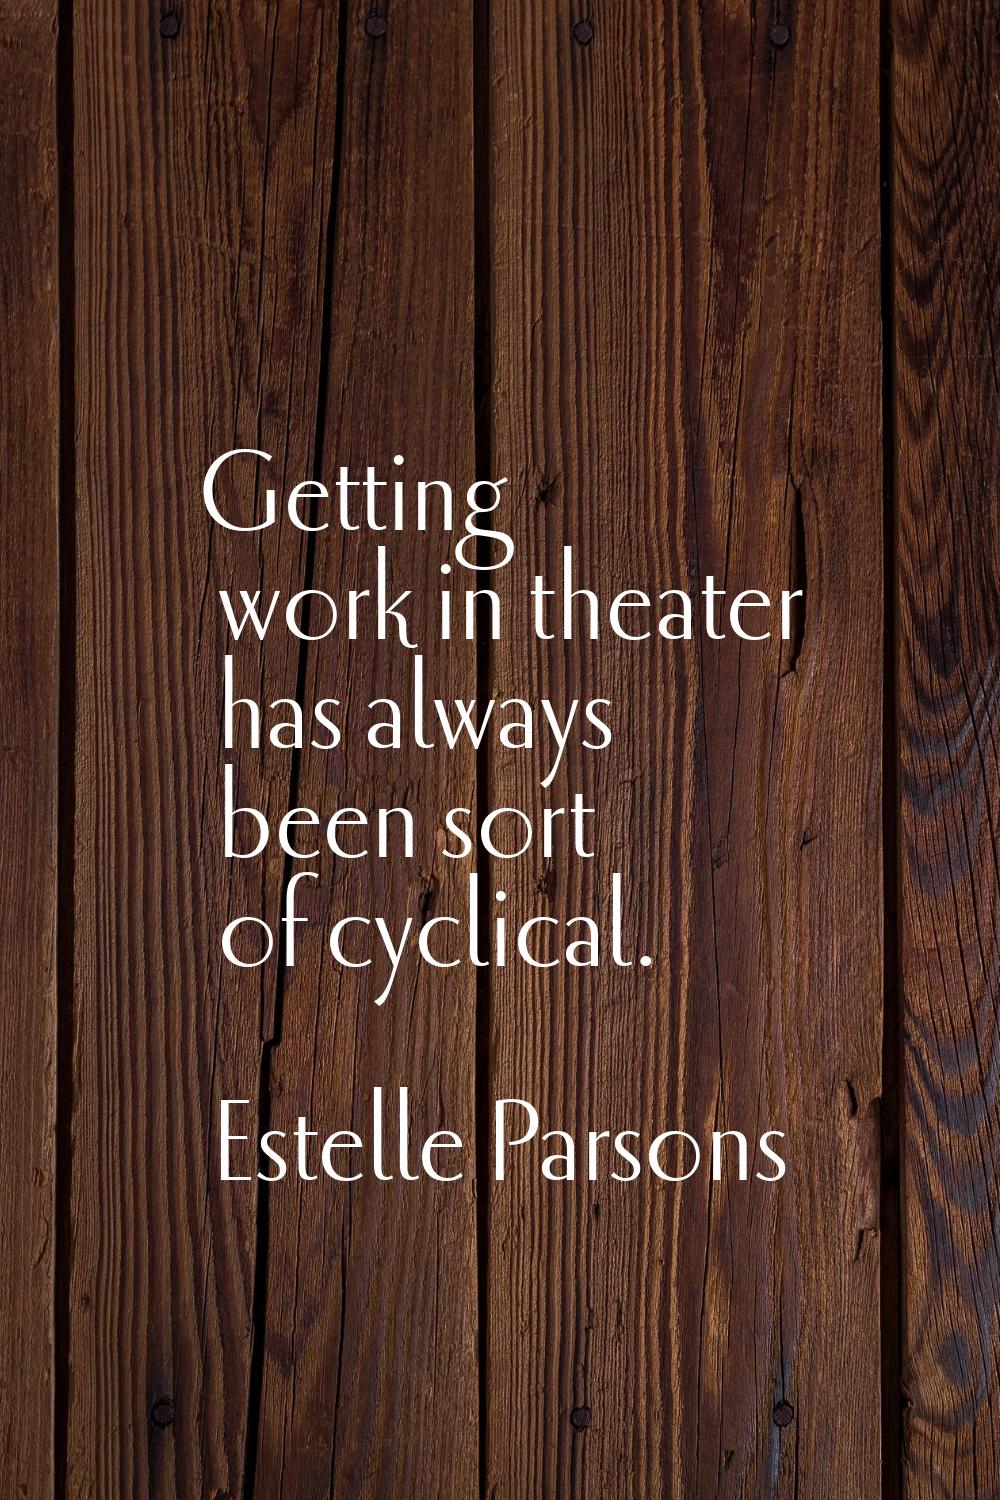 Getting work in theater has always been sort of cyclical.